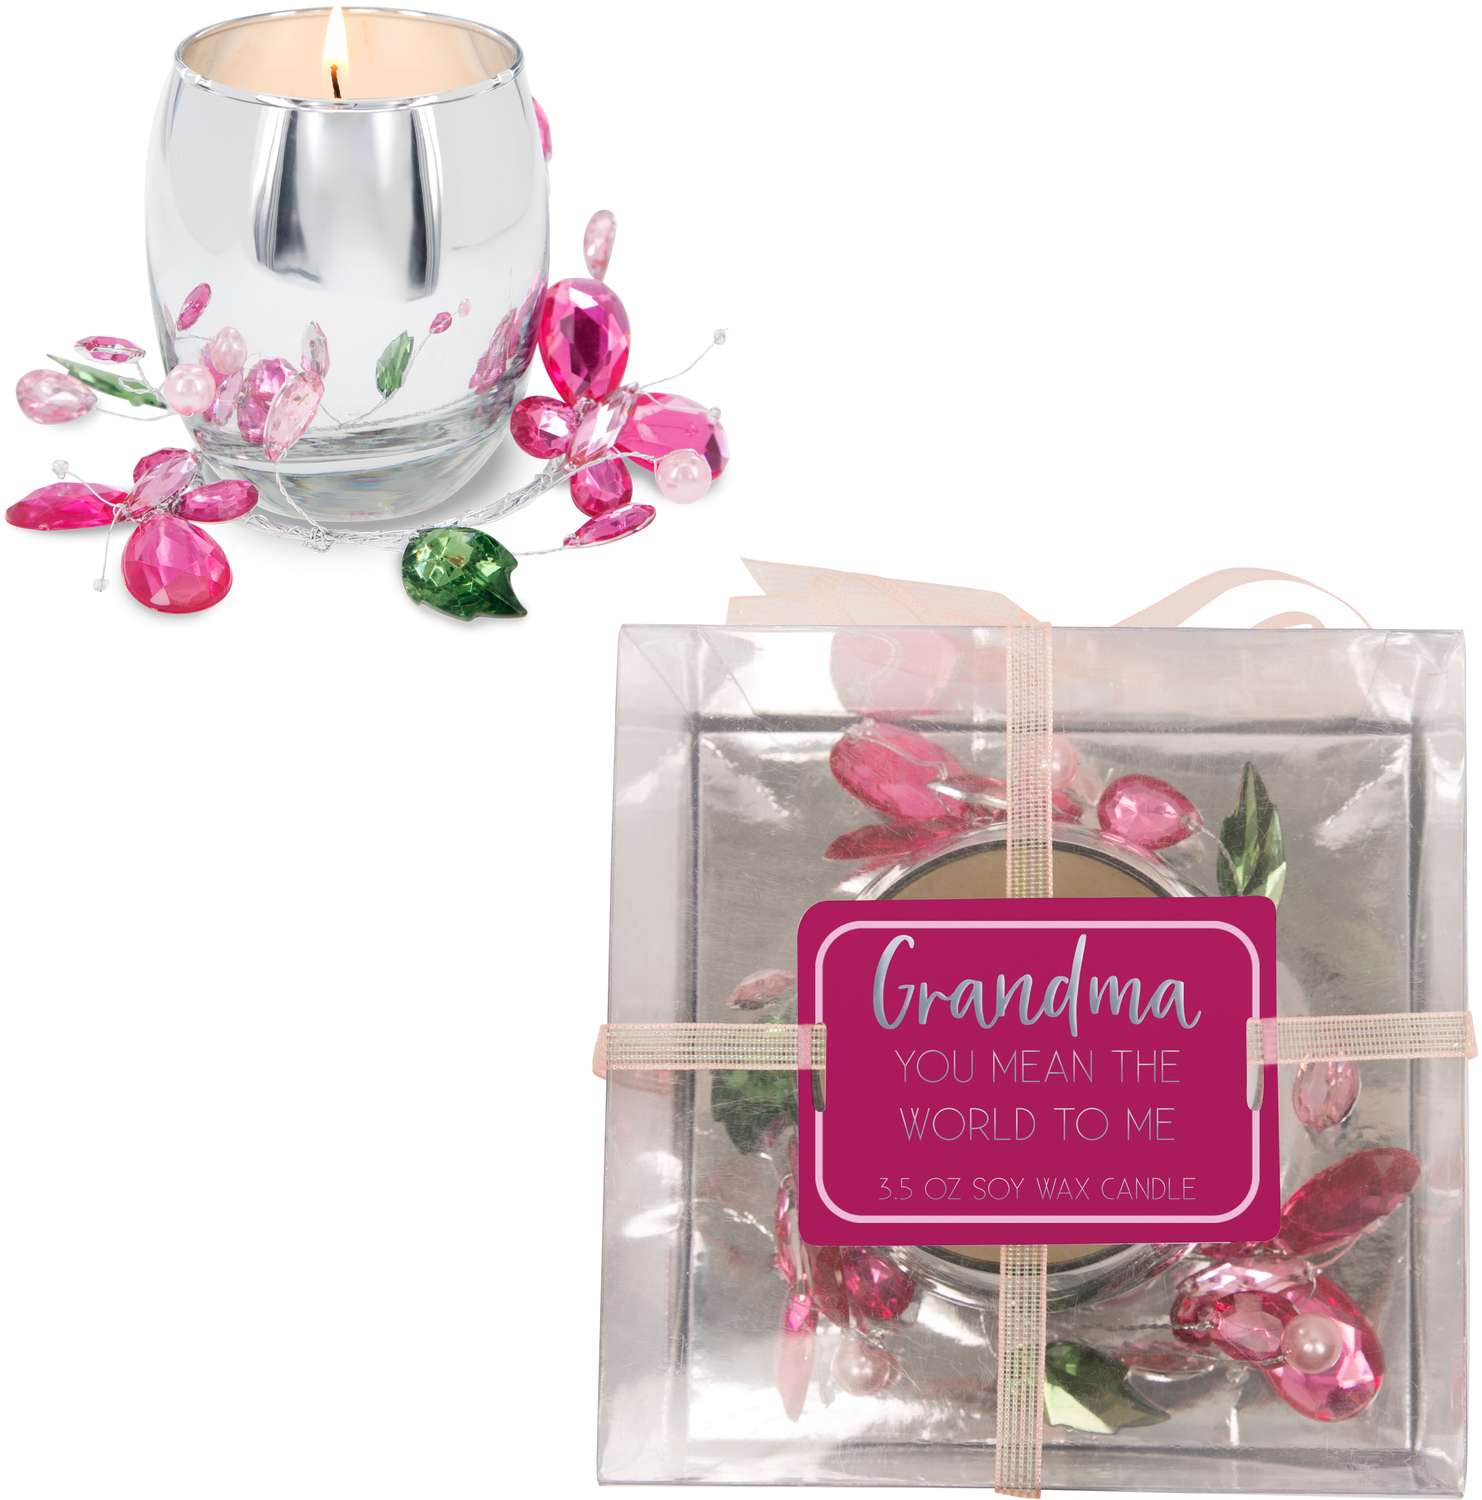 Grandma
Pink Butterfly by Reflections of You - Grandma
Pink Butterfly - 3.5 oz 100% Soy Wax Candle
Scent: Jasmine